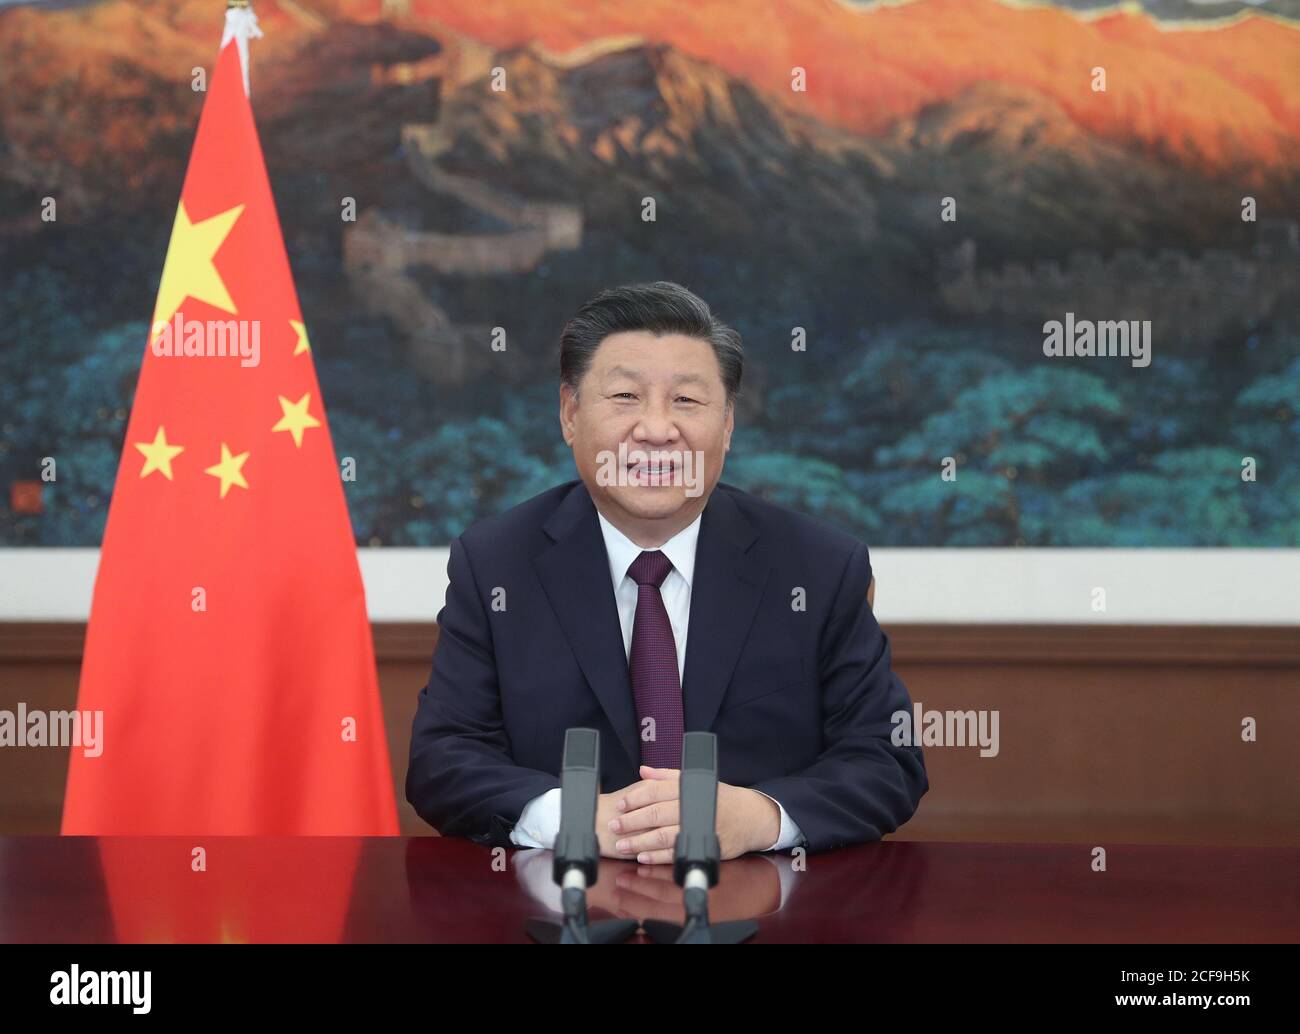 Beijing, China. 4th Sep, 2020. Chinese President Xi Jinping addresses the Global Trade in Services Summit of the 2020 China International Fair for Trade in Services (CIFTIS) via video on Sept. 4, 2020. Credit: Ju Peng/Xinhua/Alamy Live News Stock Photo